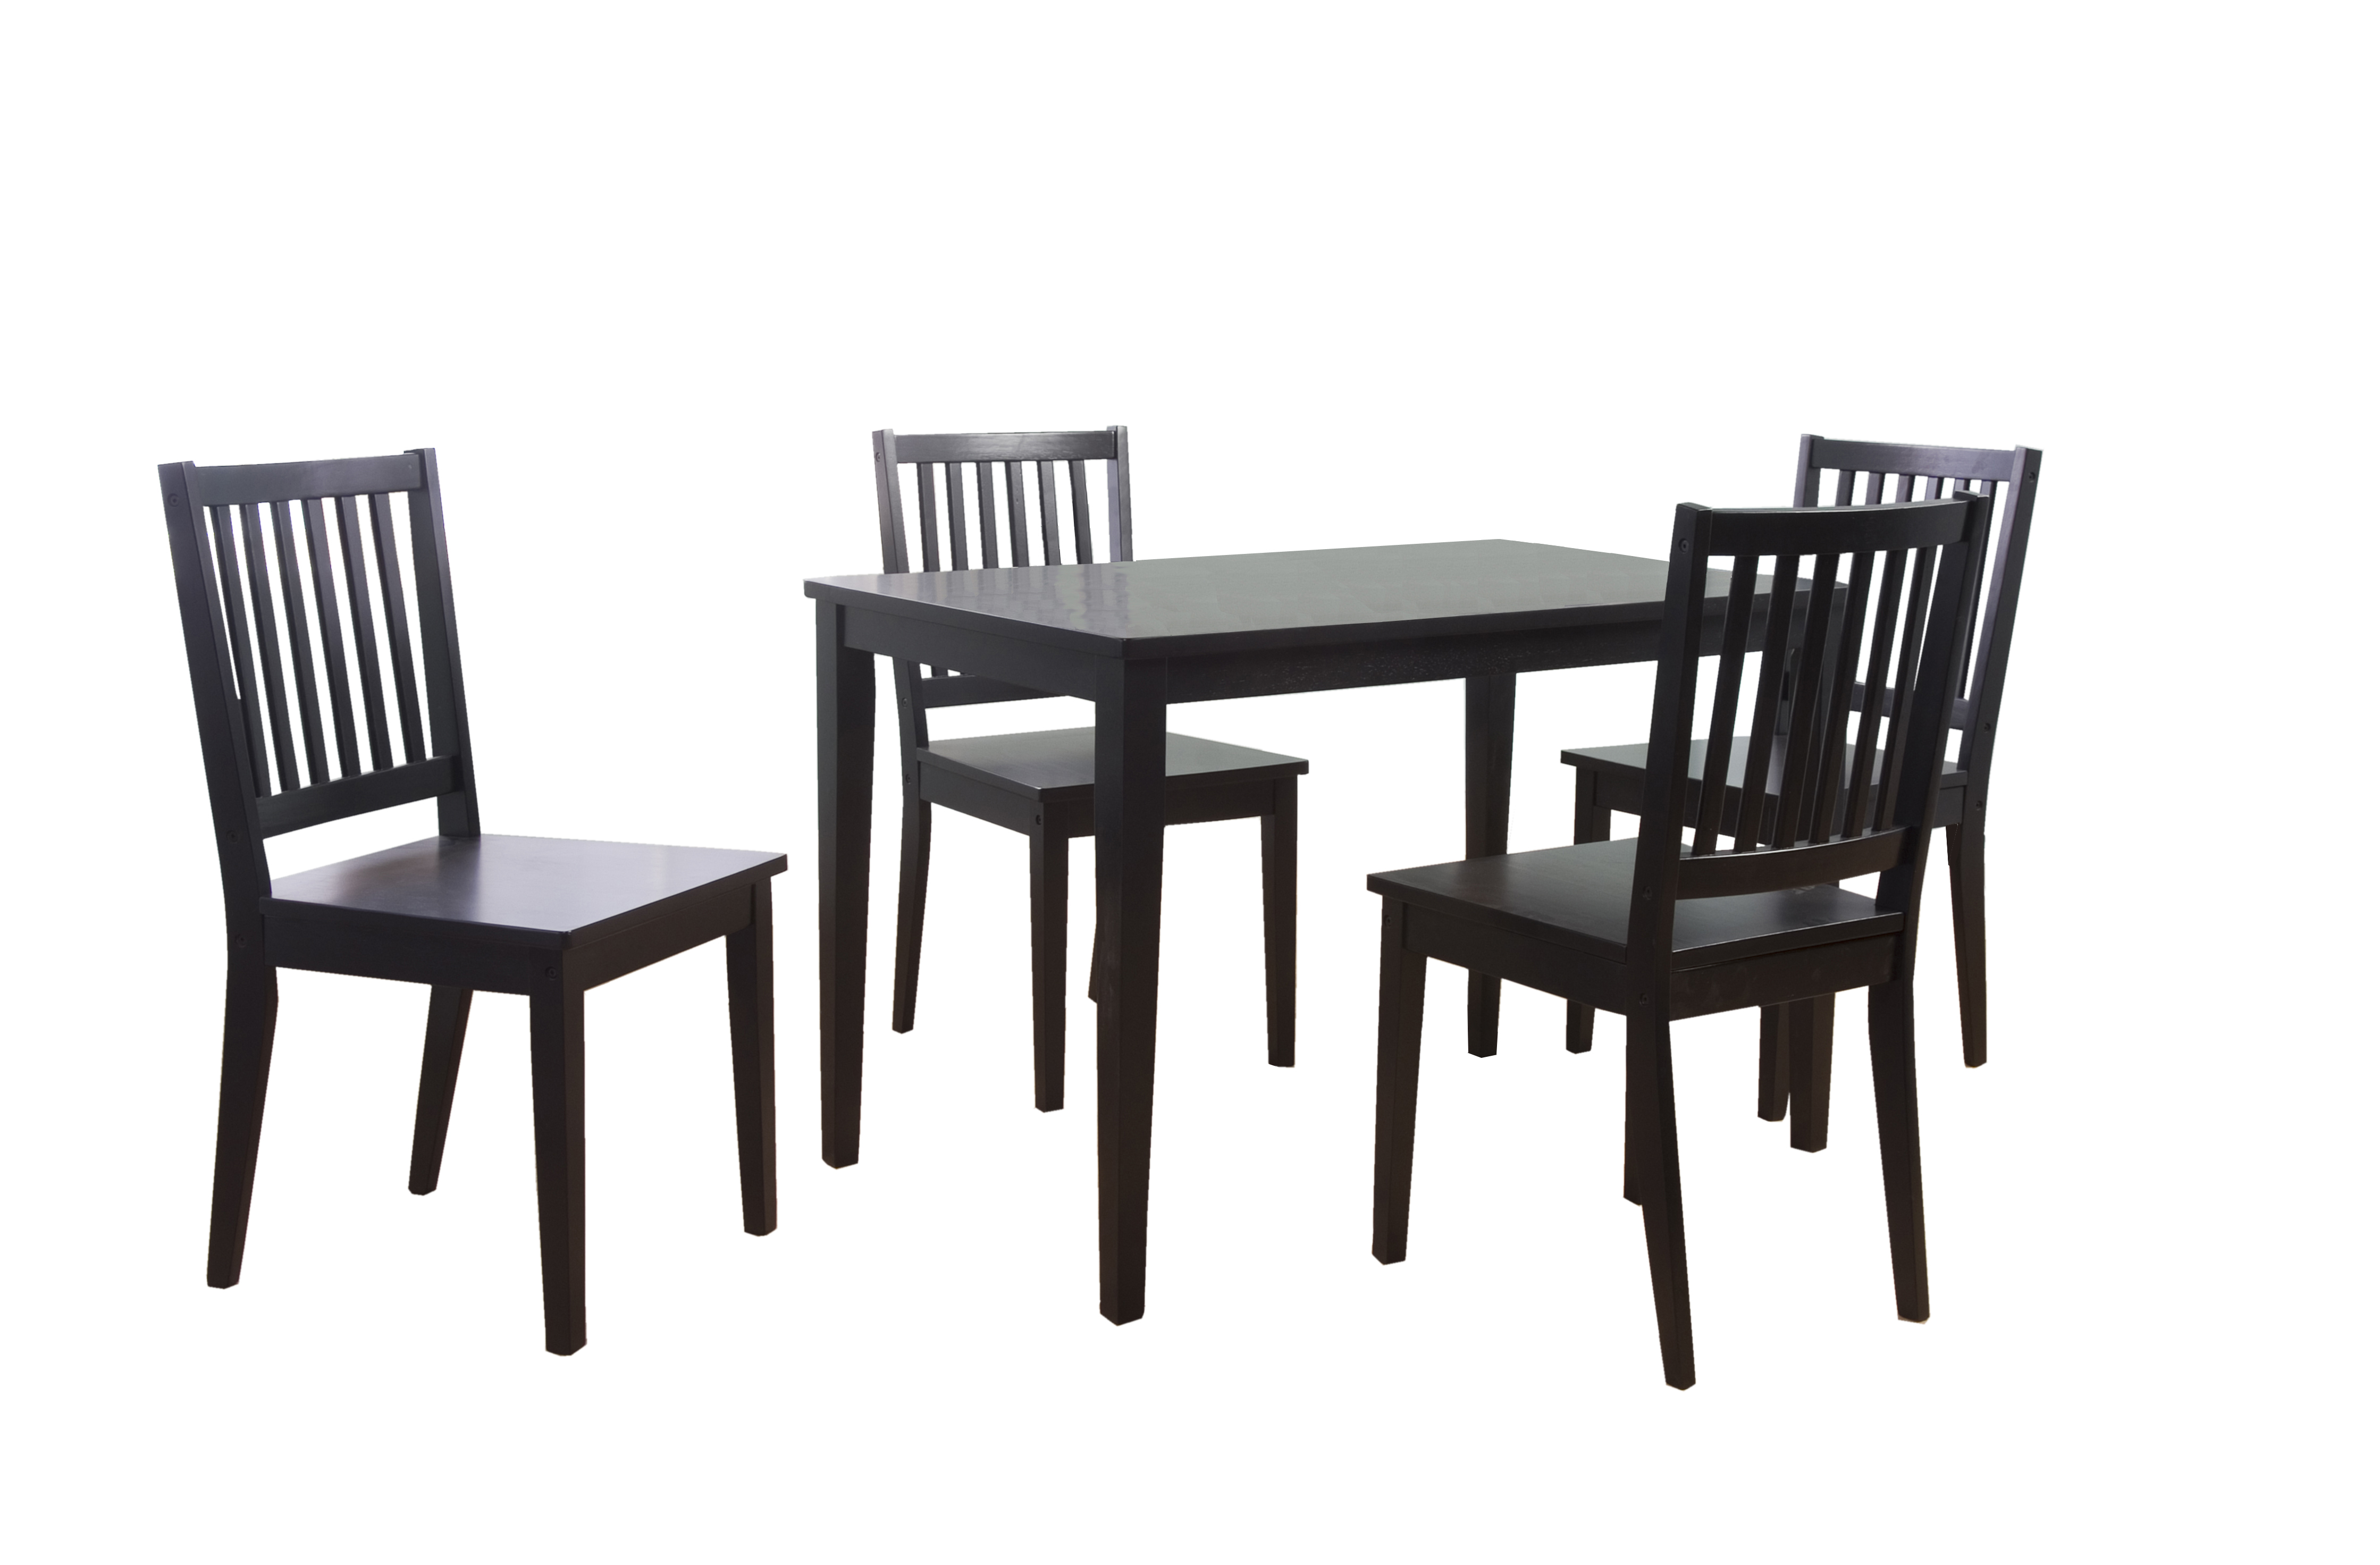 TMS Shaker Dining Indoor Wood Chair, Set of 4, Black - image 5 of 7